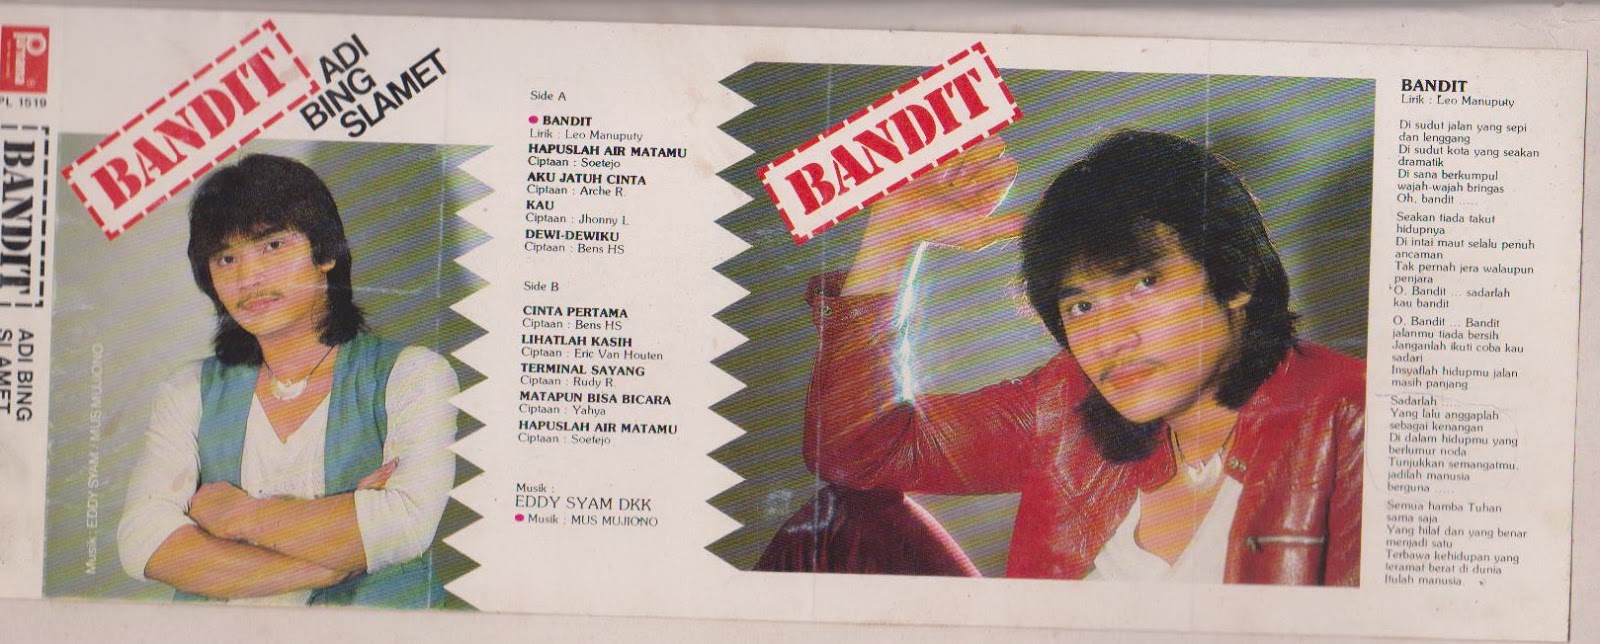 Album cover of Bandit by Adi Bing Slamet. Indonesian man in a red jacket reminiscent of Michael Jackson.